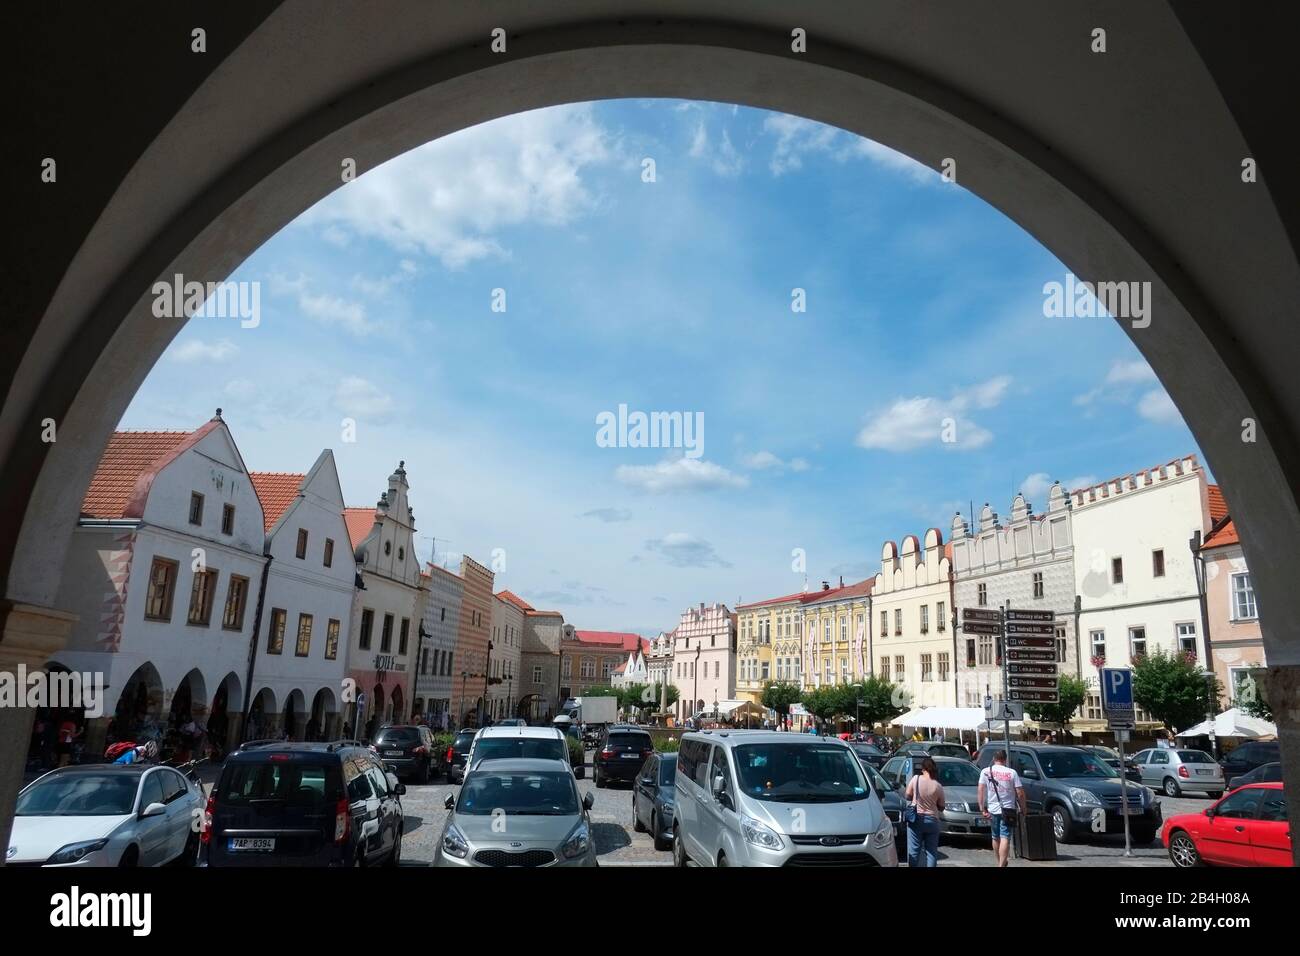 Peace Square in Renaissance town of Slavonice photographed through archway. Czech Republic Stock Photo